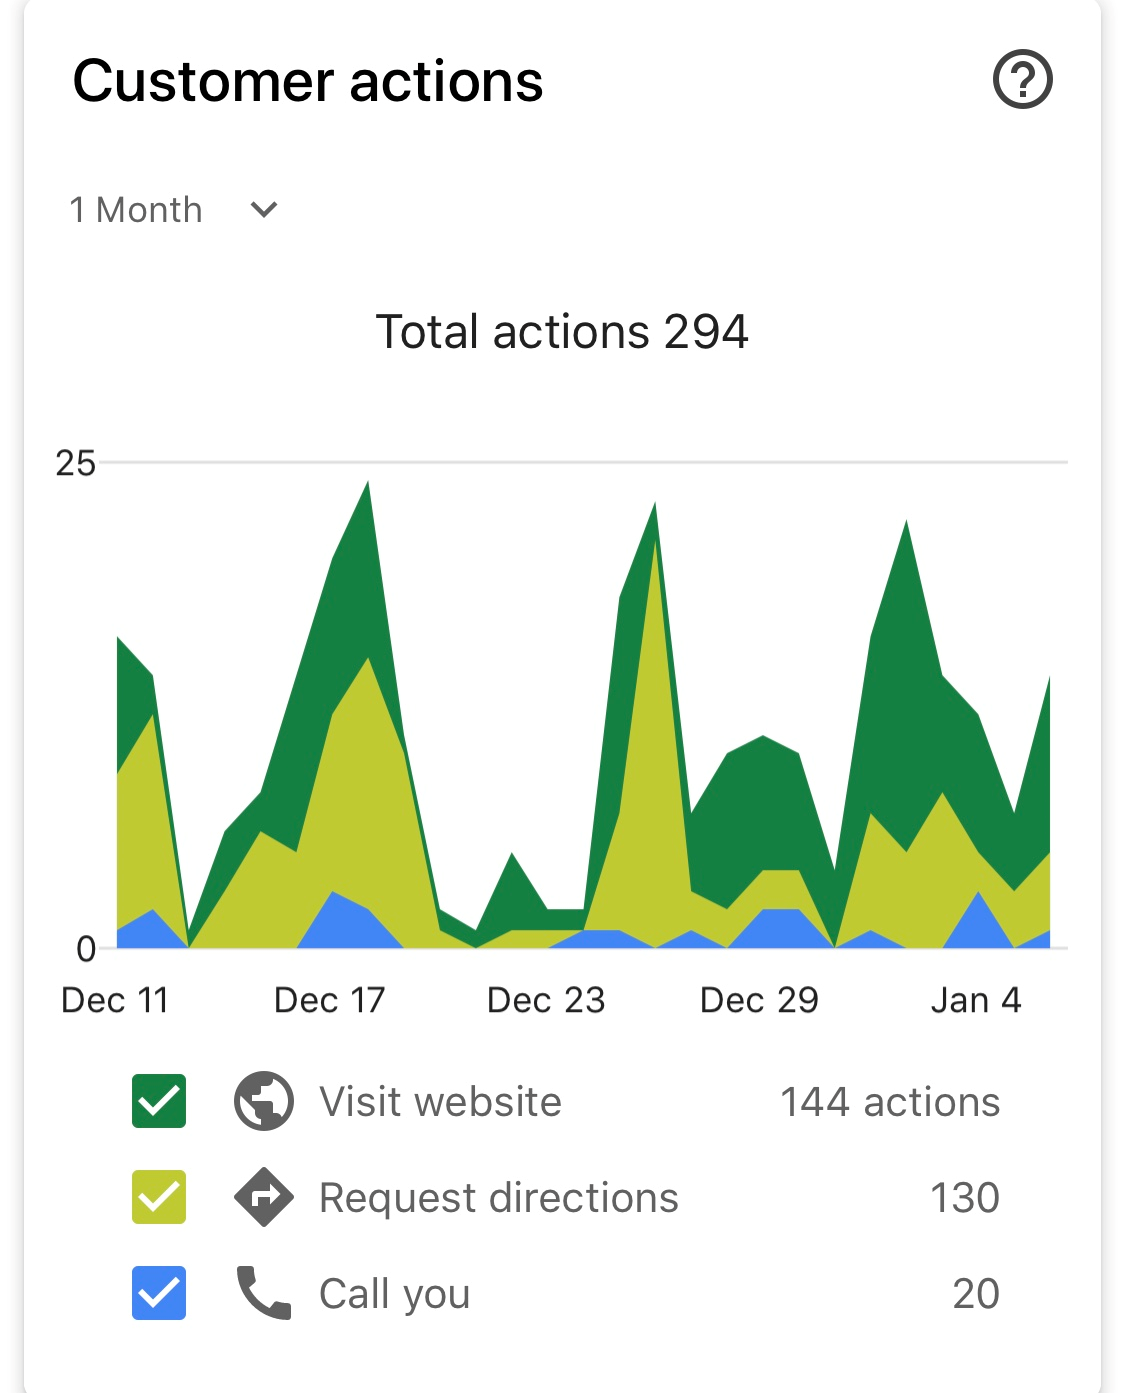 Google My Business Chart for Customer Actions - 294 total actions, 144 website visits, 130 directions requested, 20 calls